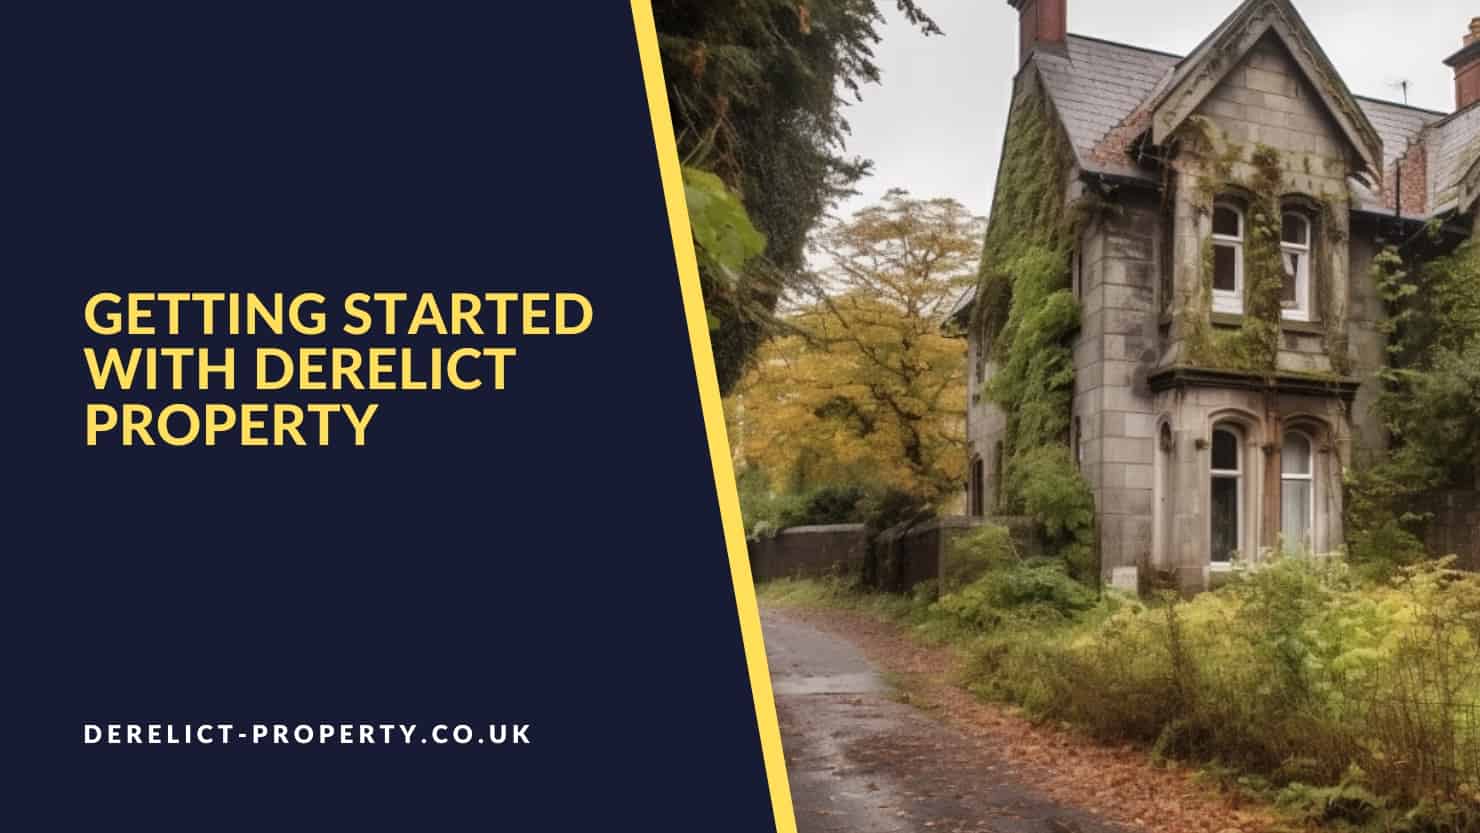 Getting started with derelict property